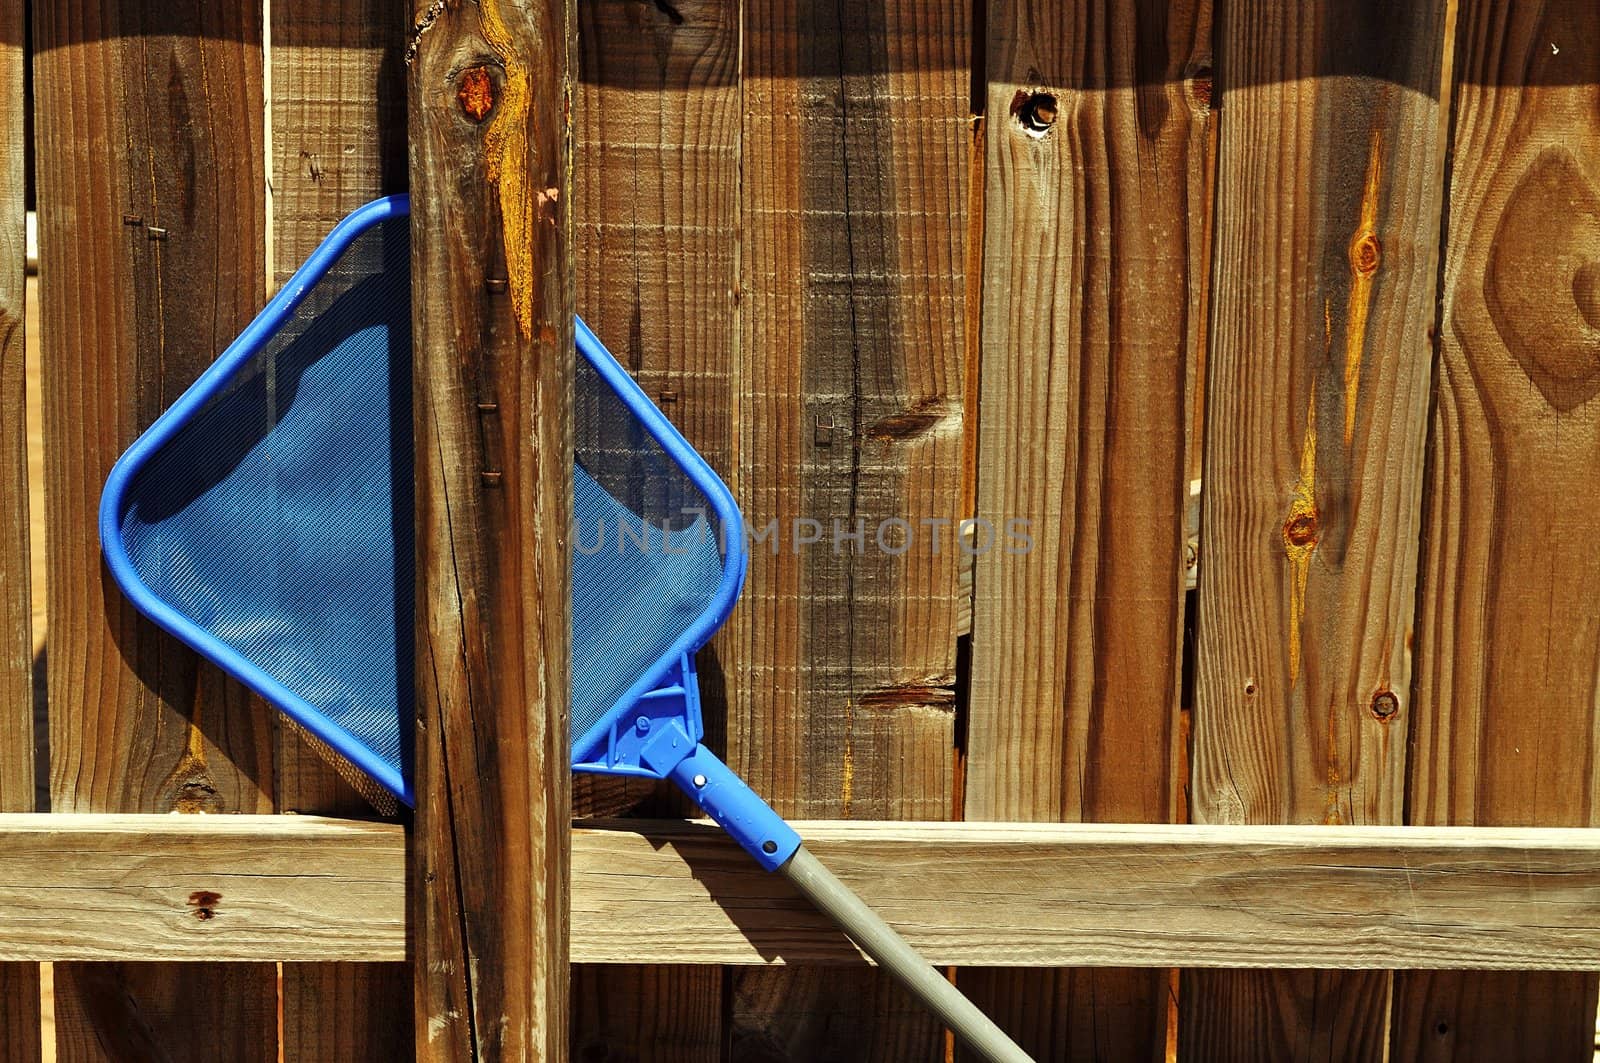 A backyard pool skimmer rests on a wooded fence.